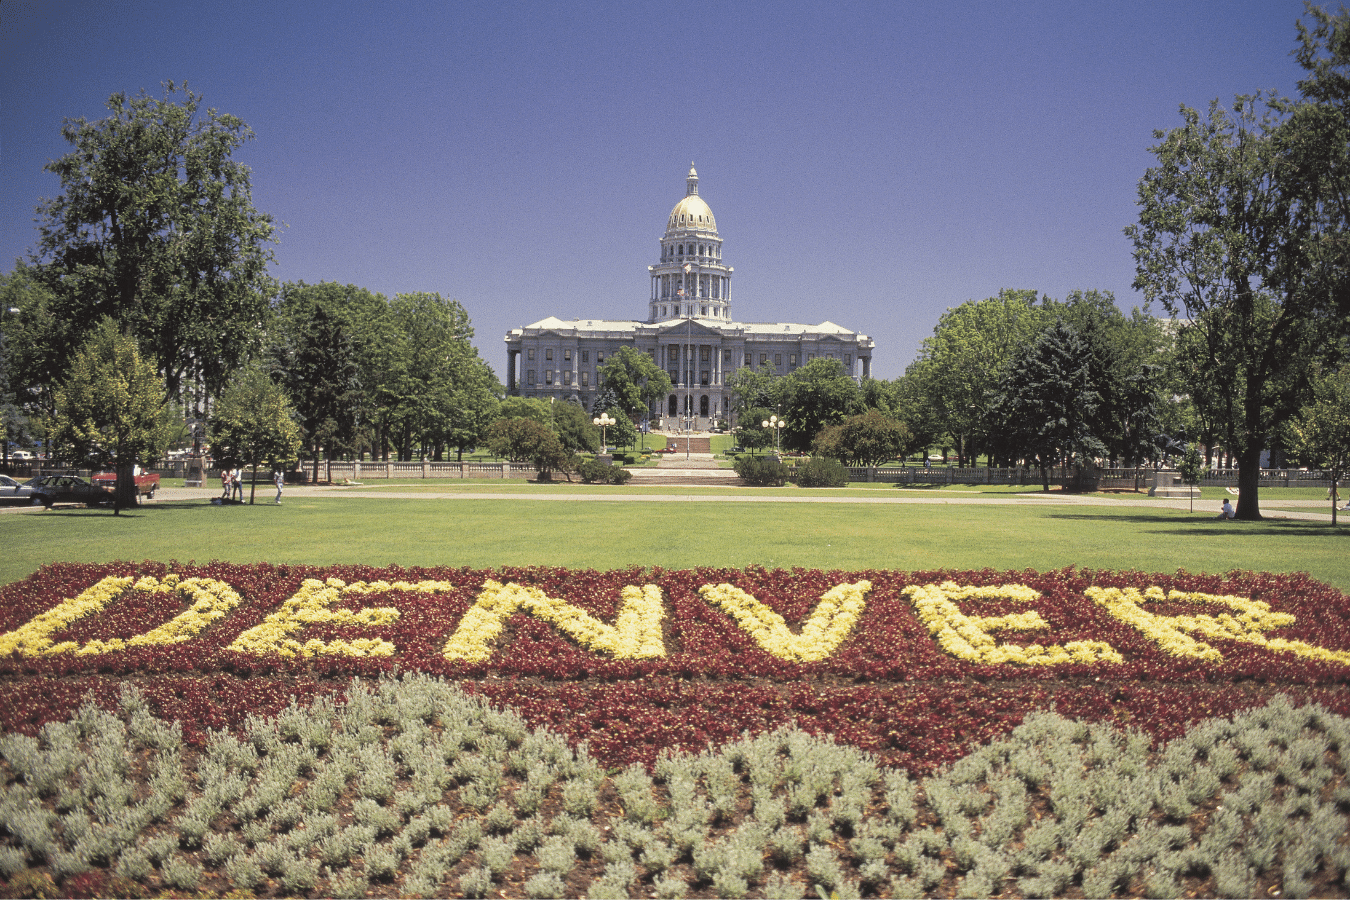 A photo of the state capital of Colorado located in Denver